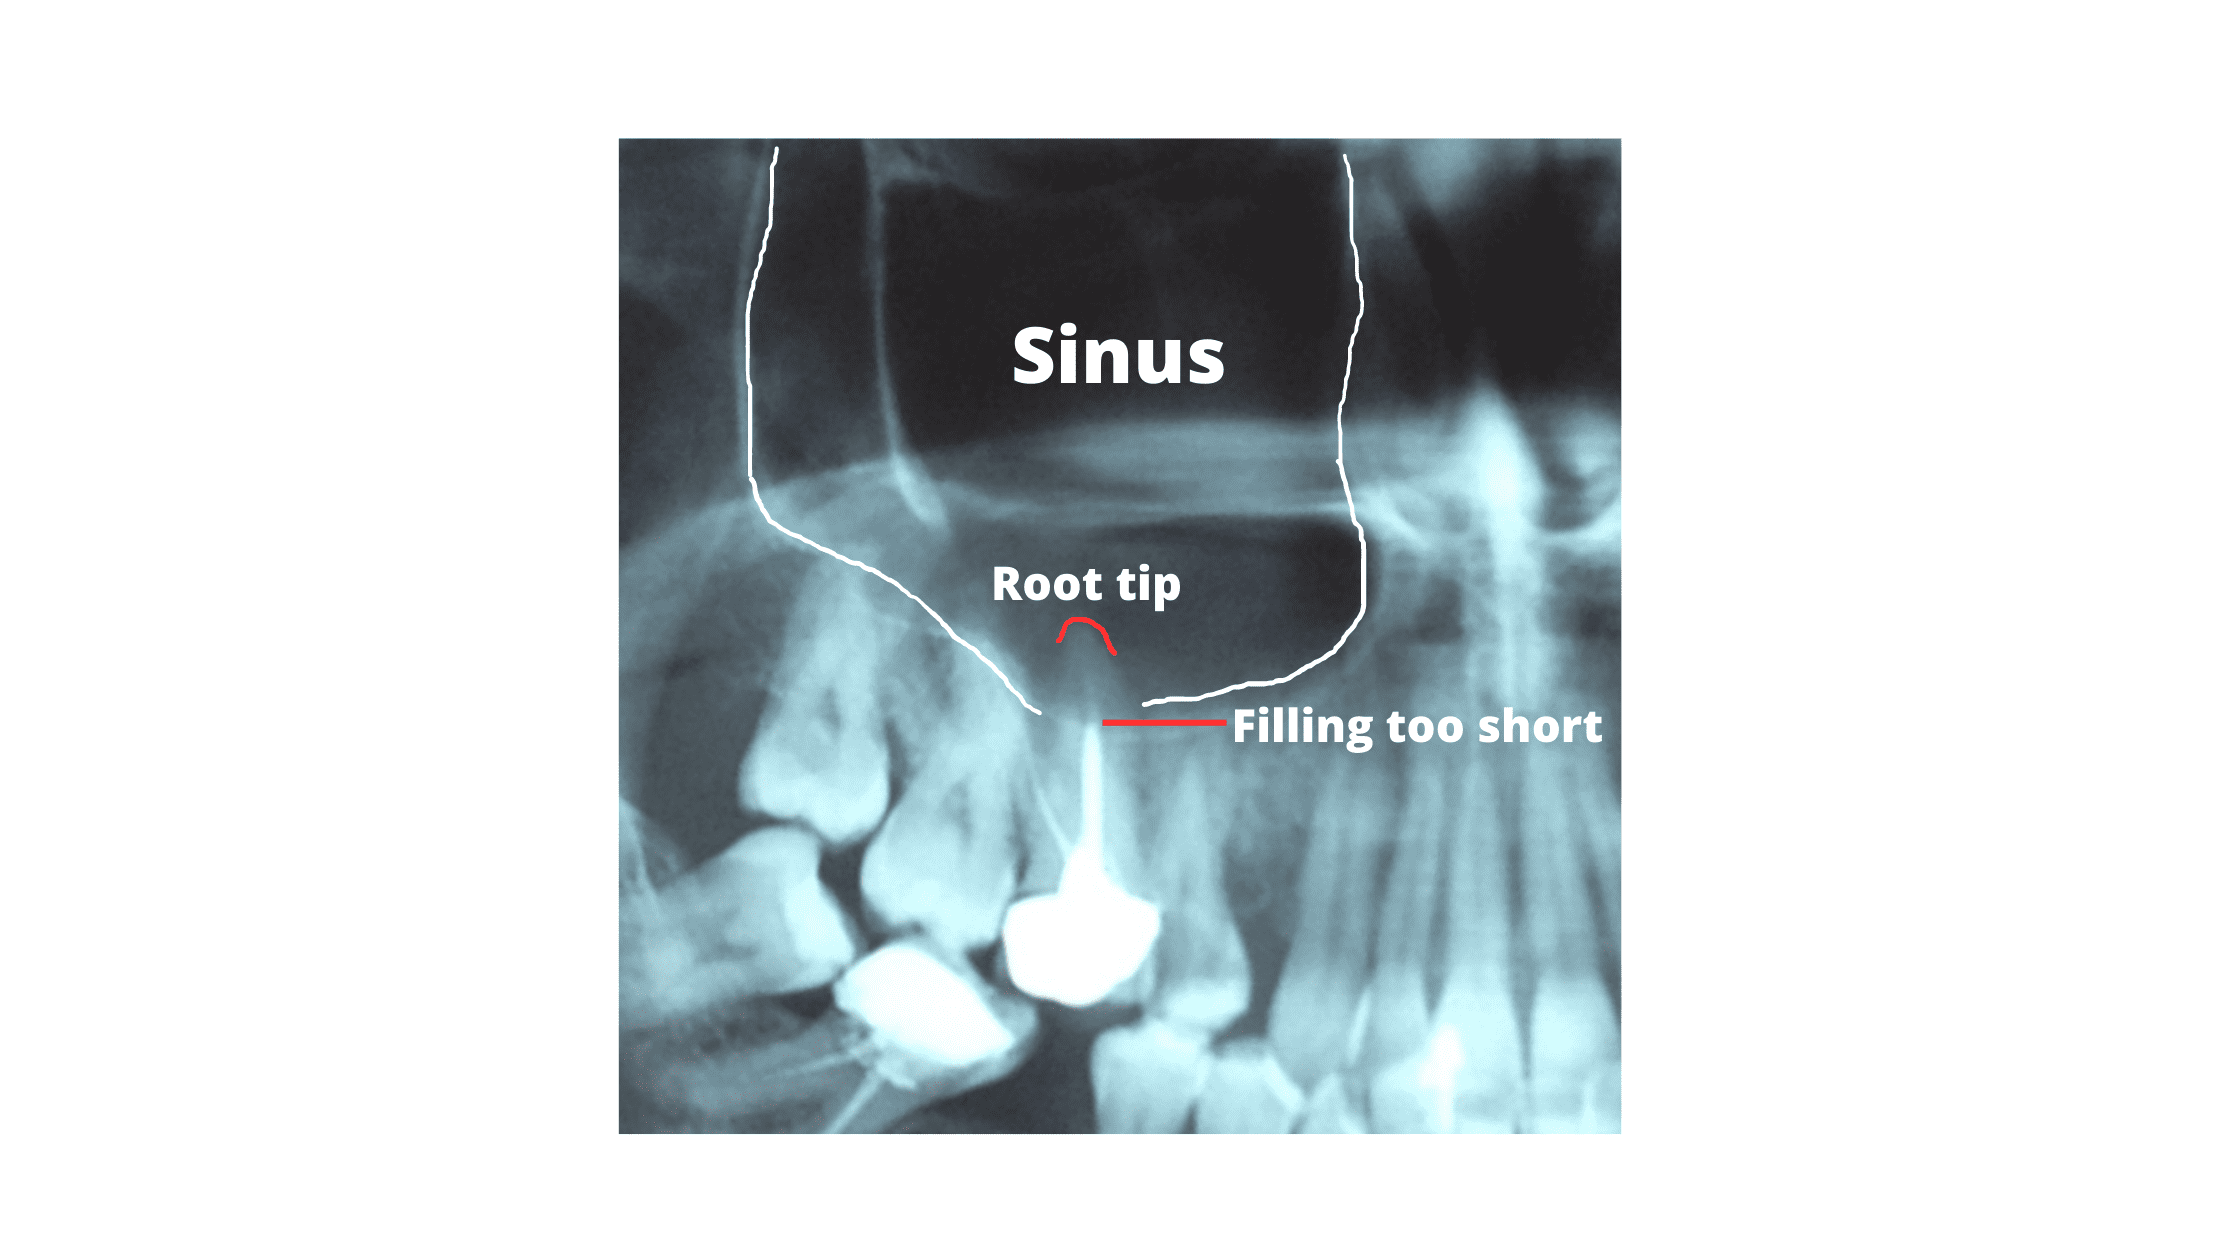 X-ray showing a short root canal filling as a cause of sinus infection